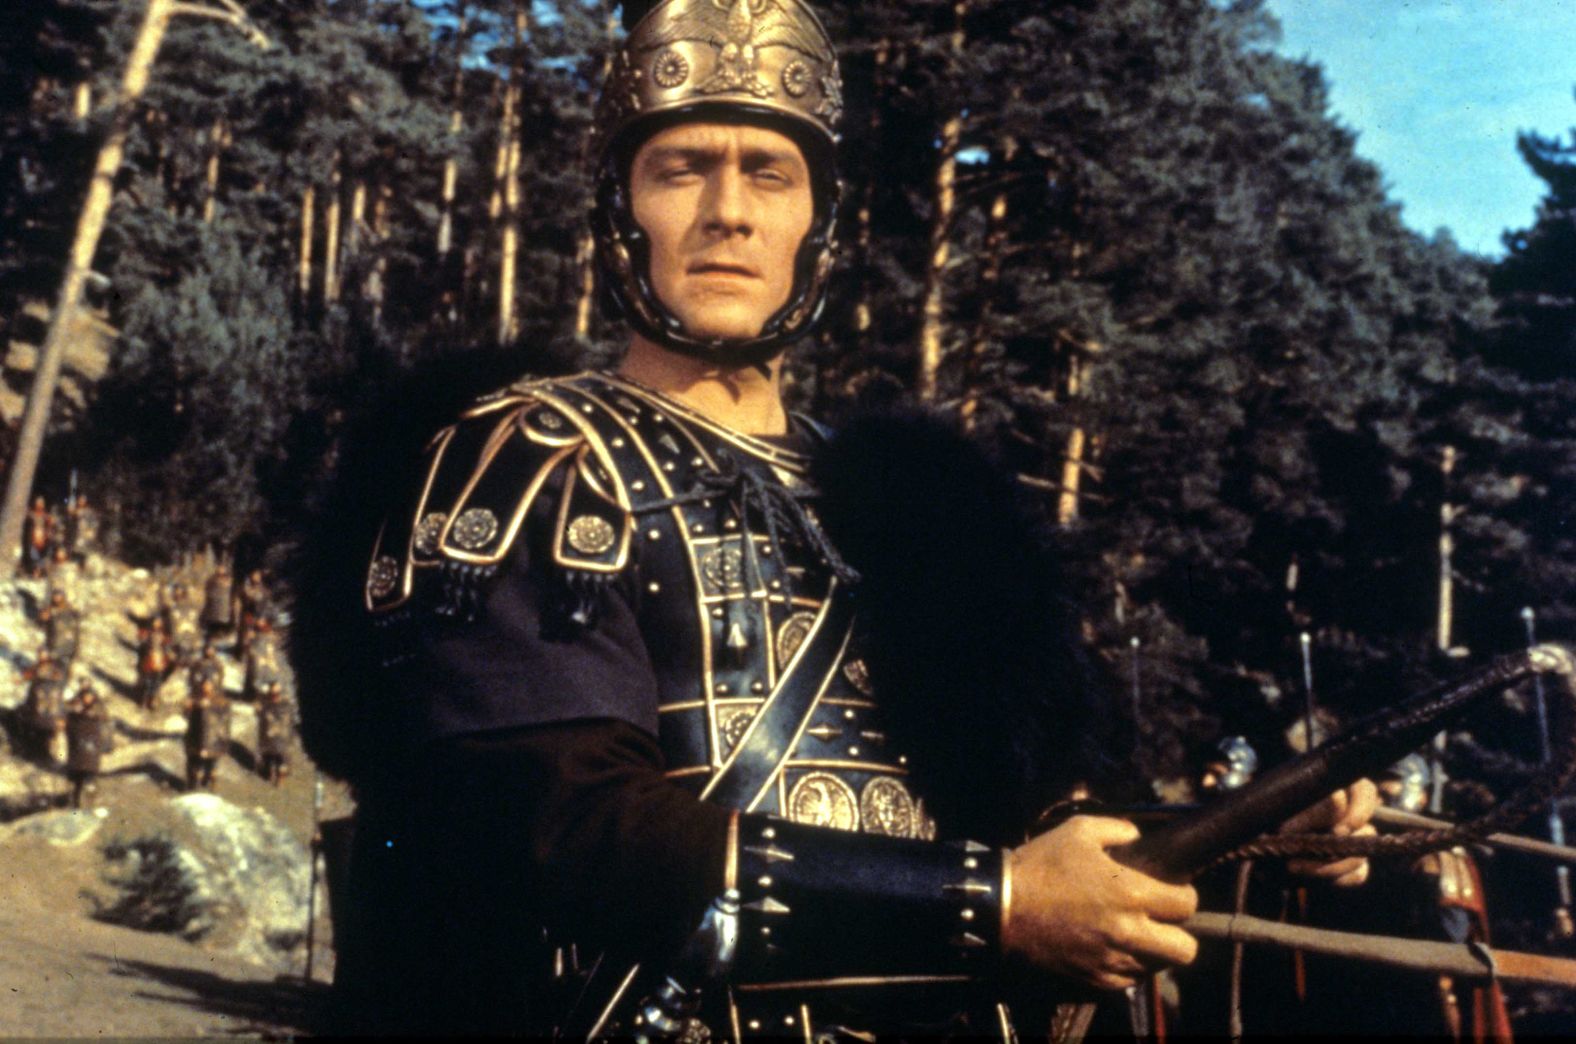 Plummer plays the emperor Commodus in "The Fall of the Roman Empire" (1964).